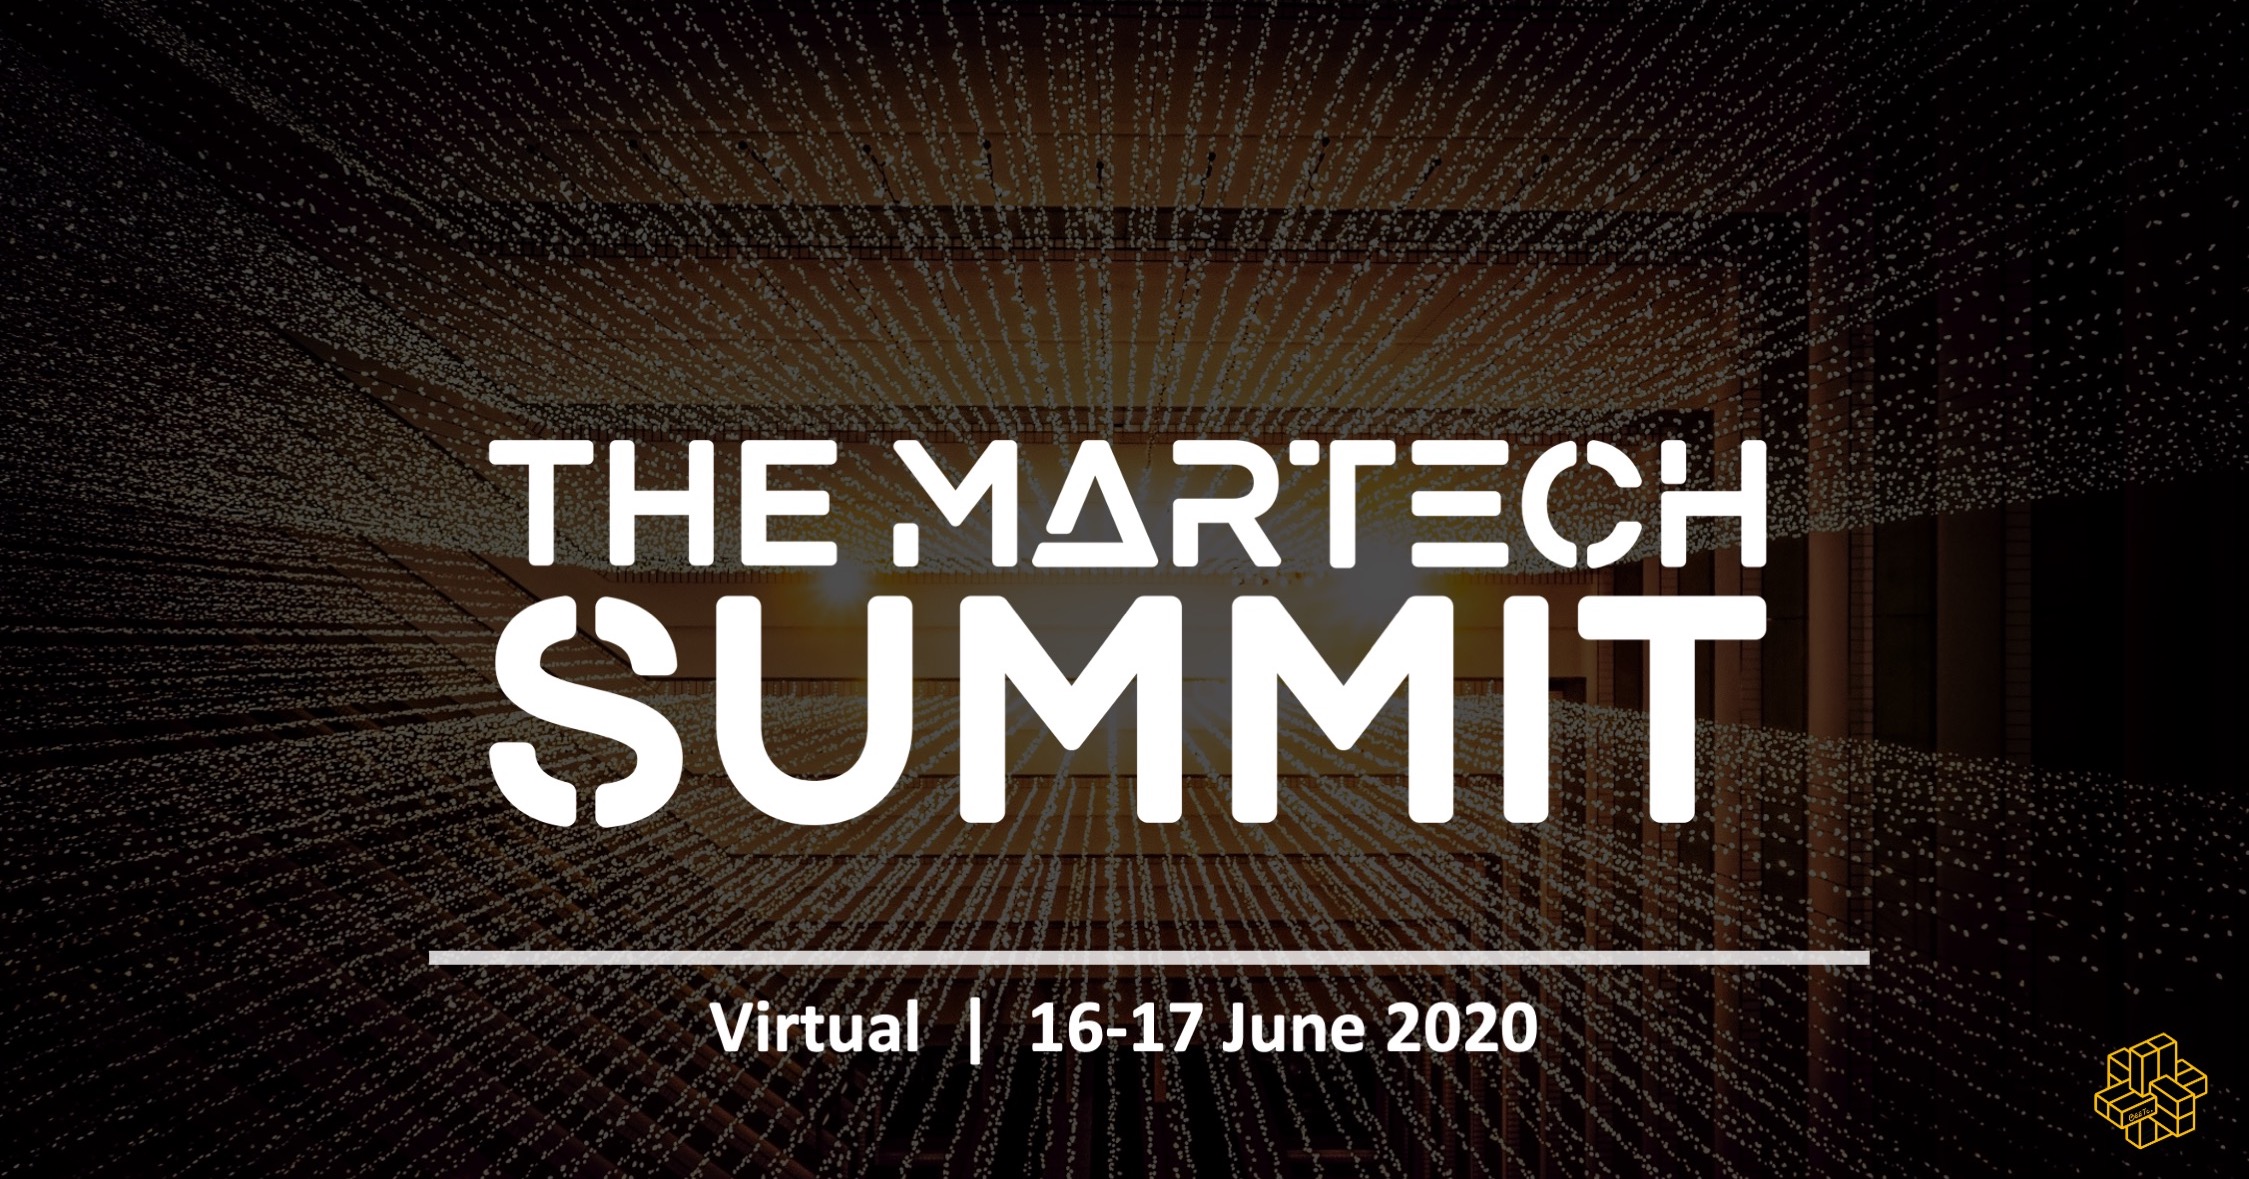 The Virtual MarTech Summit organized by BEETc